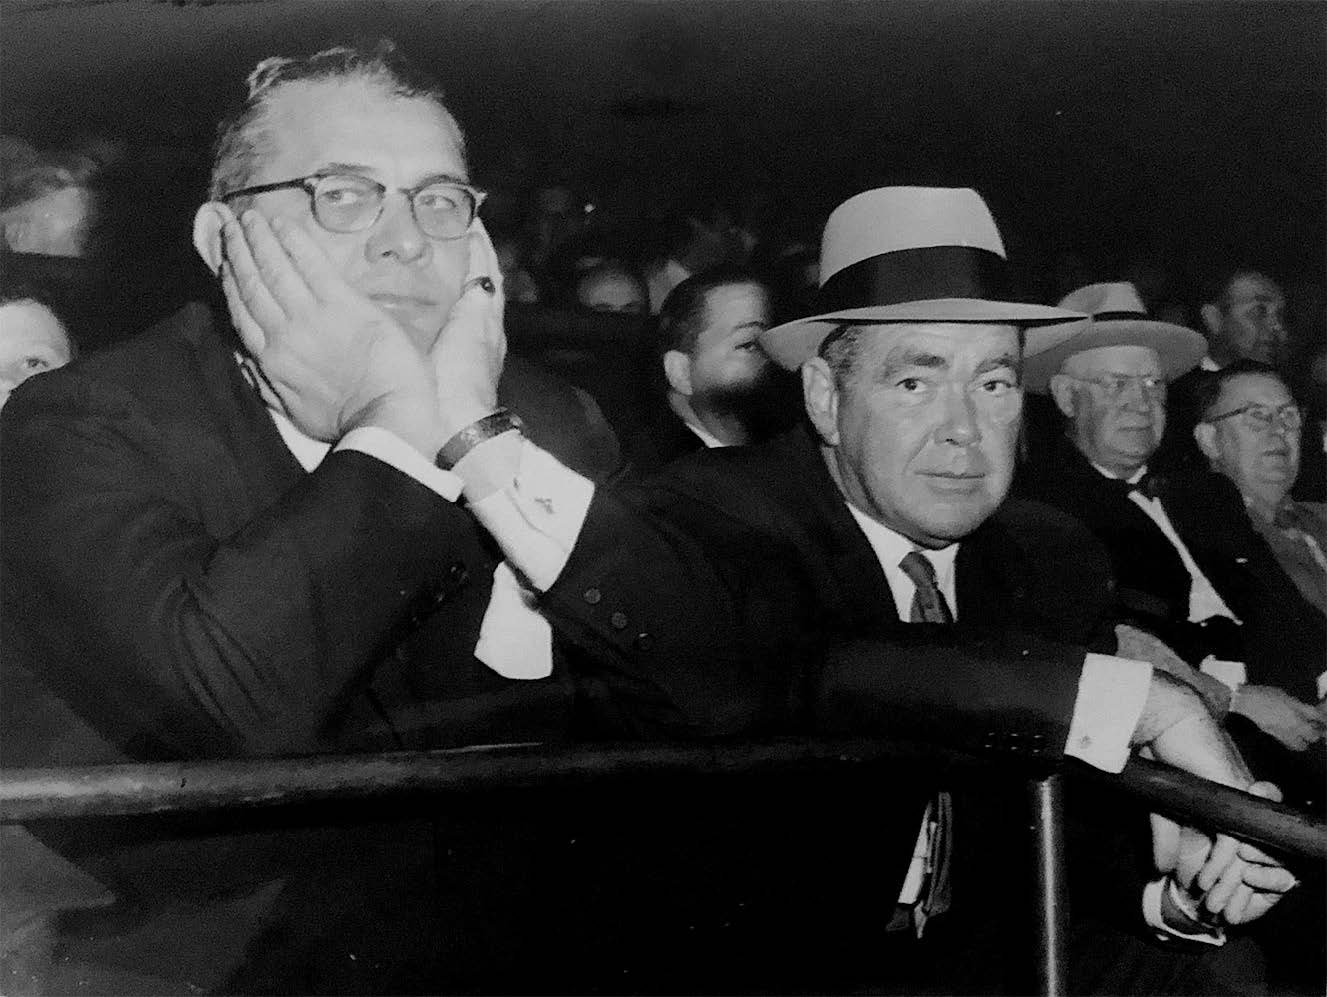  Arthur, seated next to partner Jimmy Norris, at Madison Square Garden. 